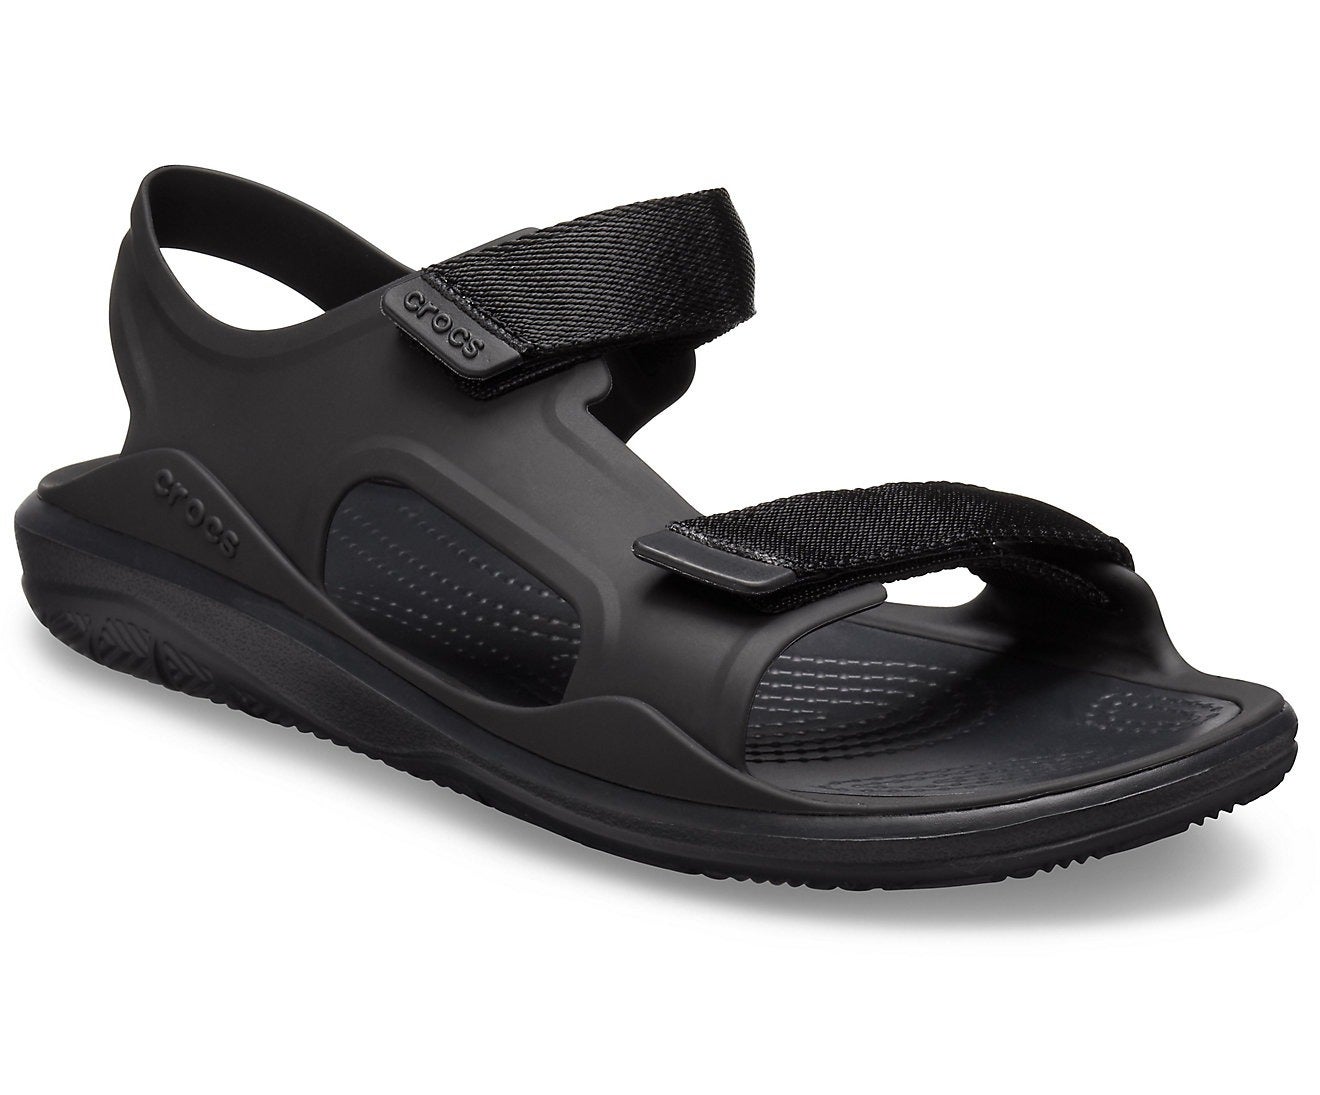  Crocs  Swiftwater   Expedition Sandal